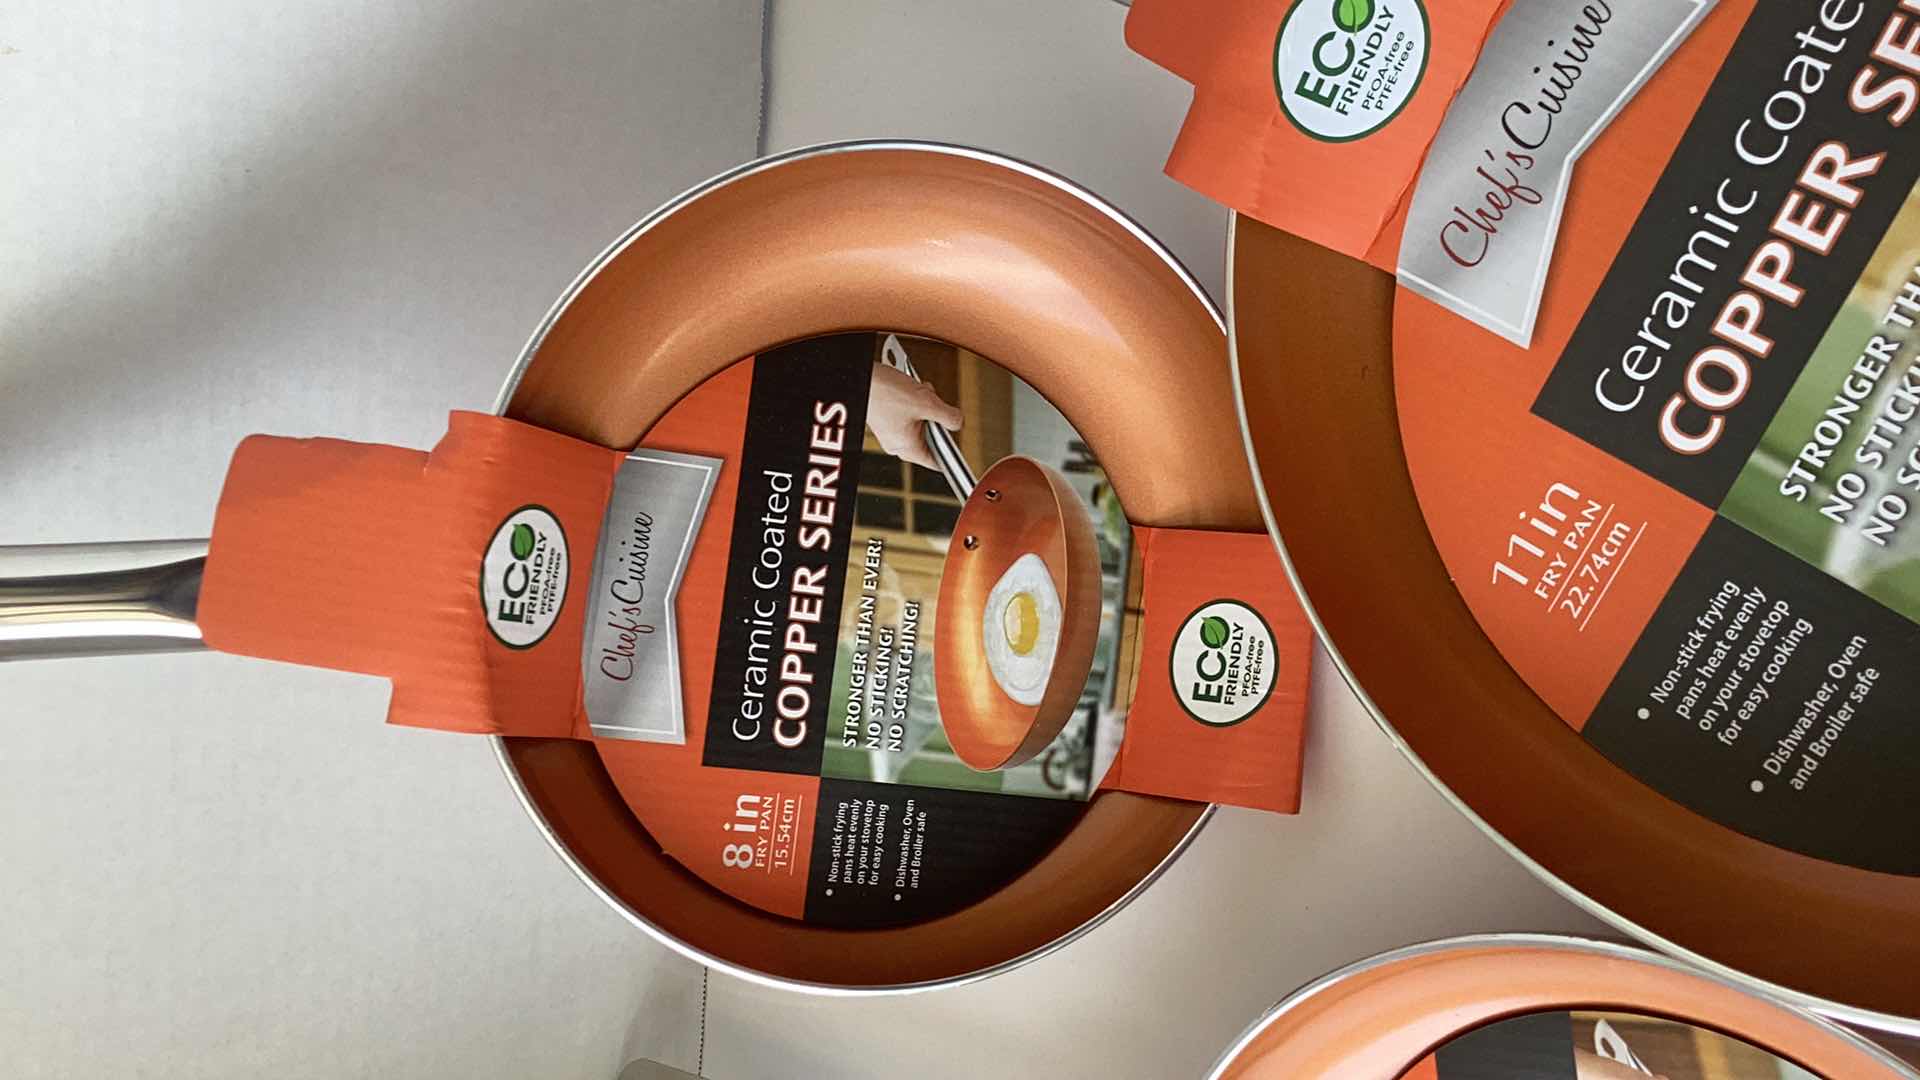 Photo 3 of CHEF’S CUISINE CERAMIC COATED COPPER COOKWARE BRAND NEW